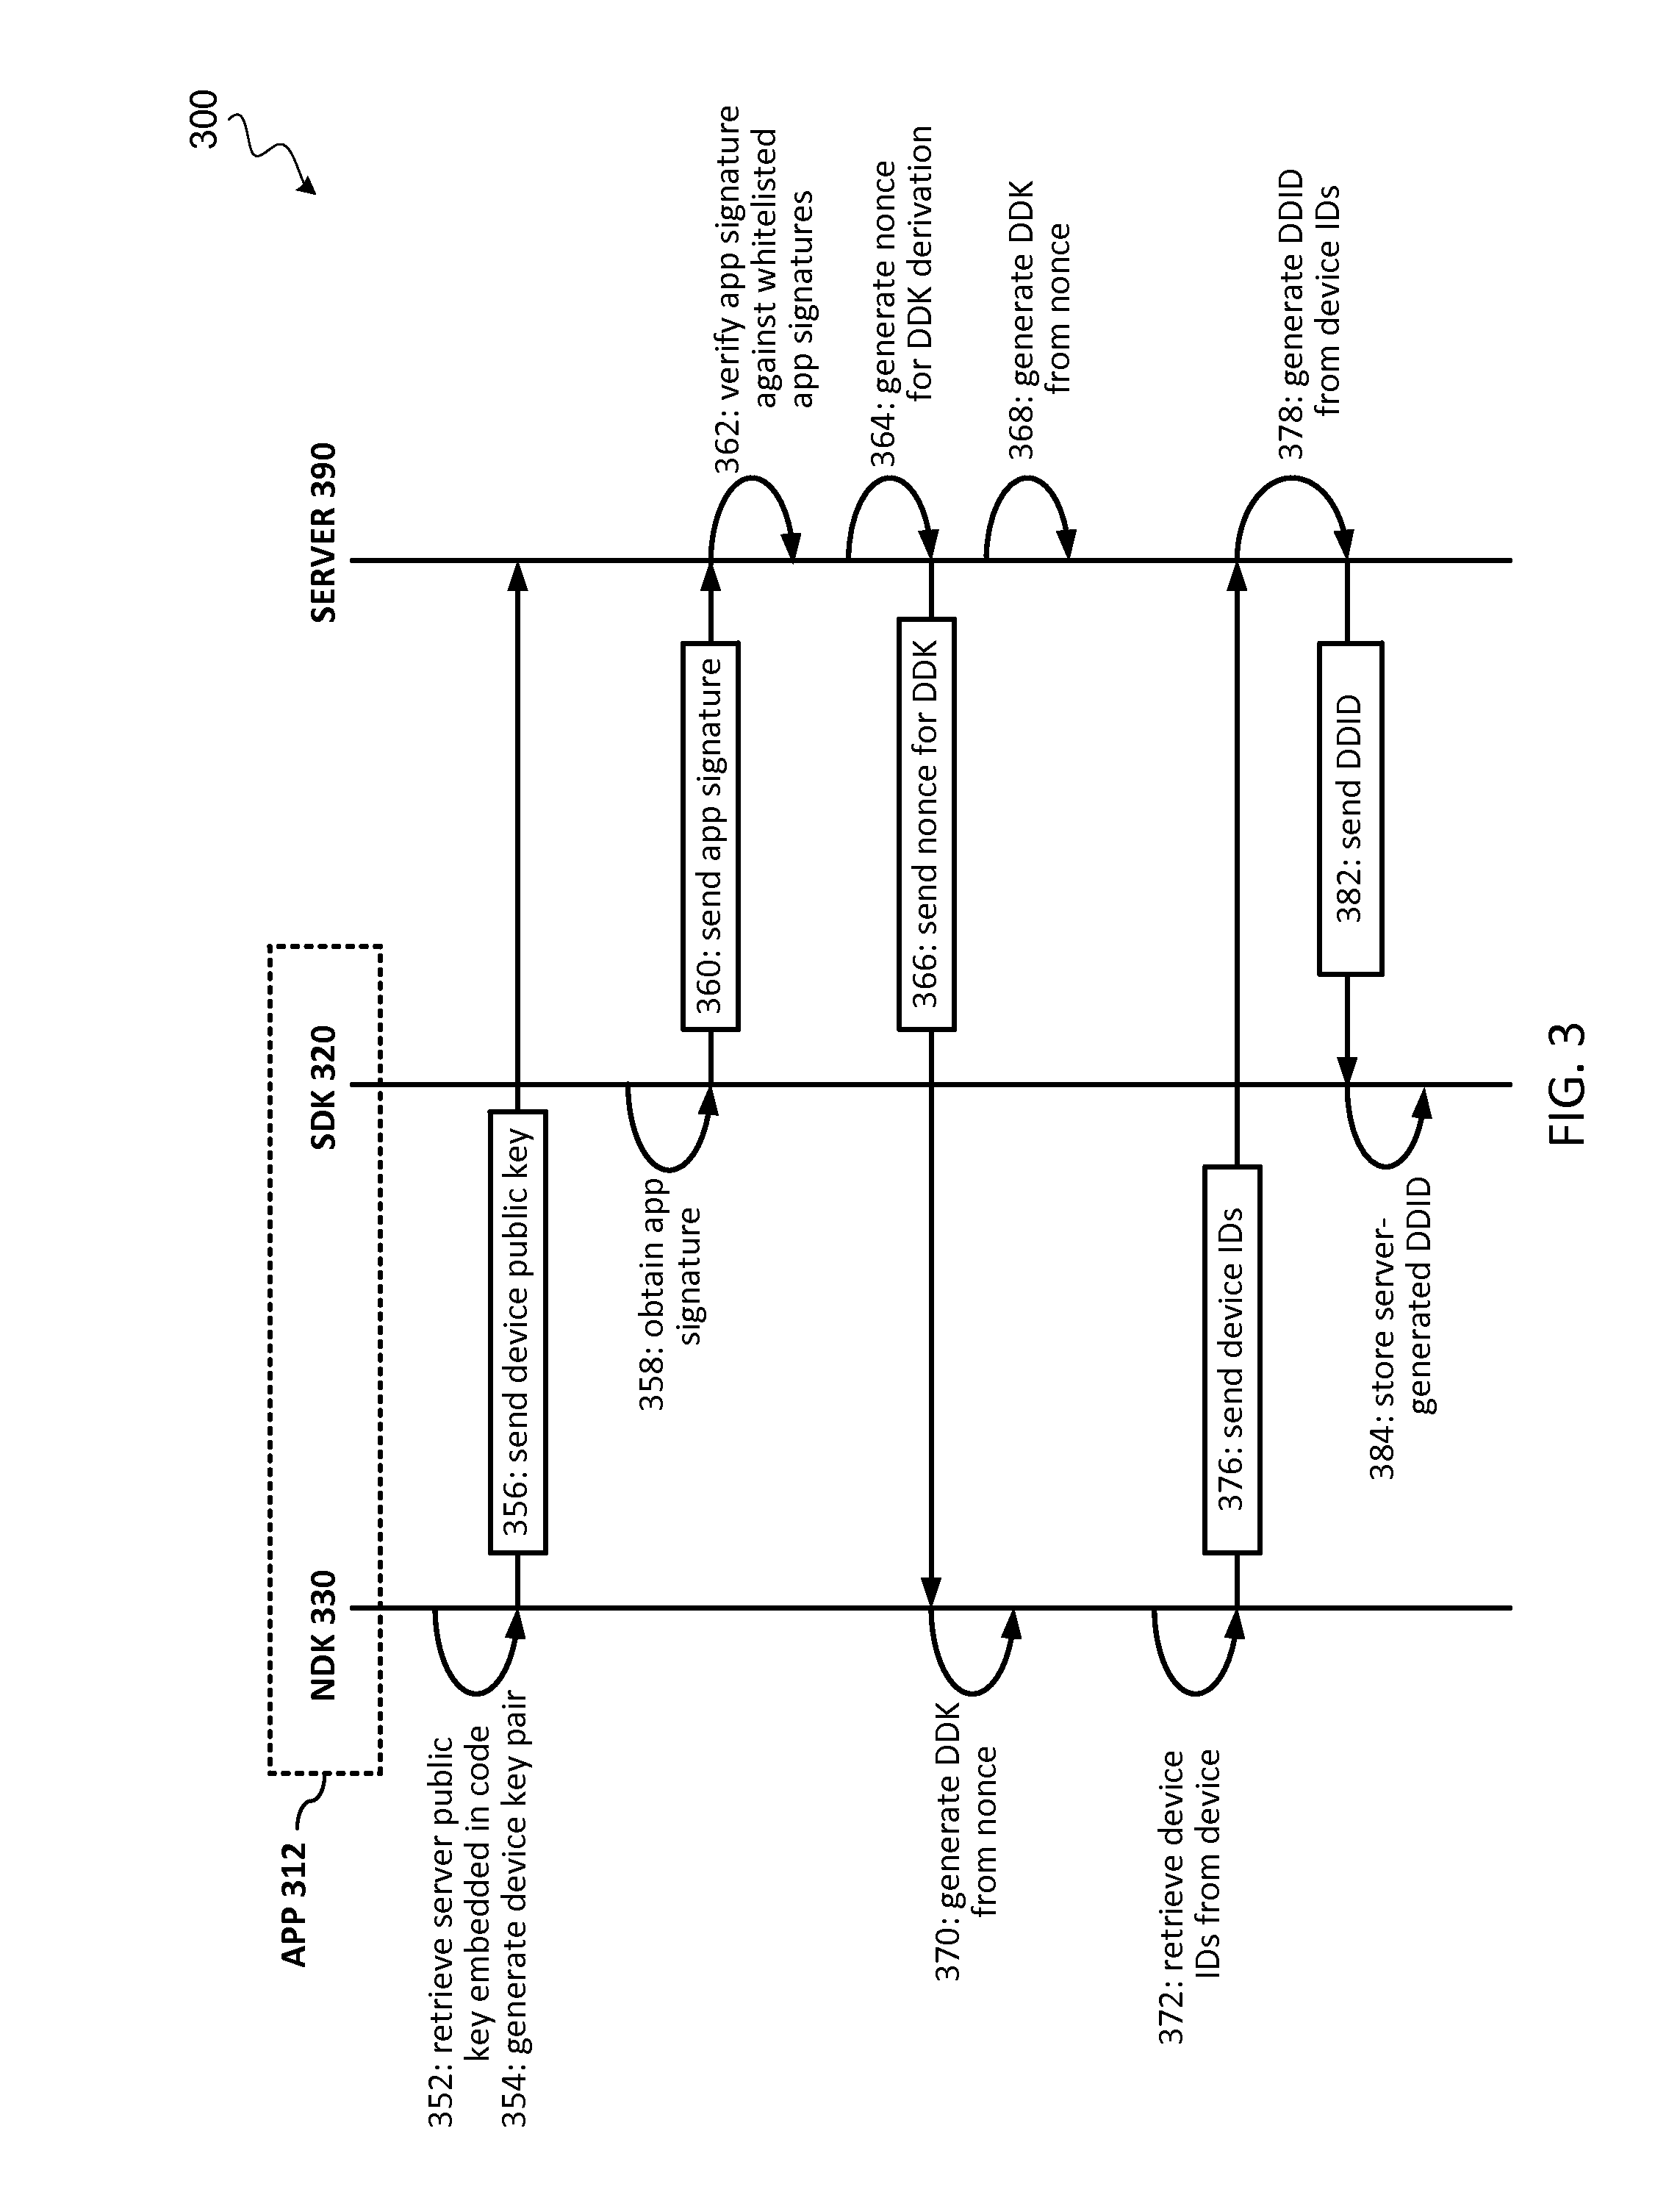 Secure binding of software application to communication device